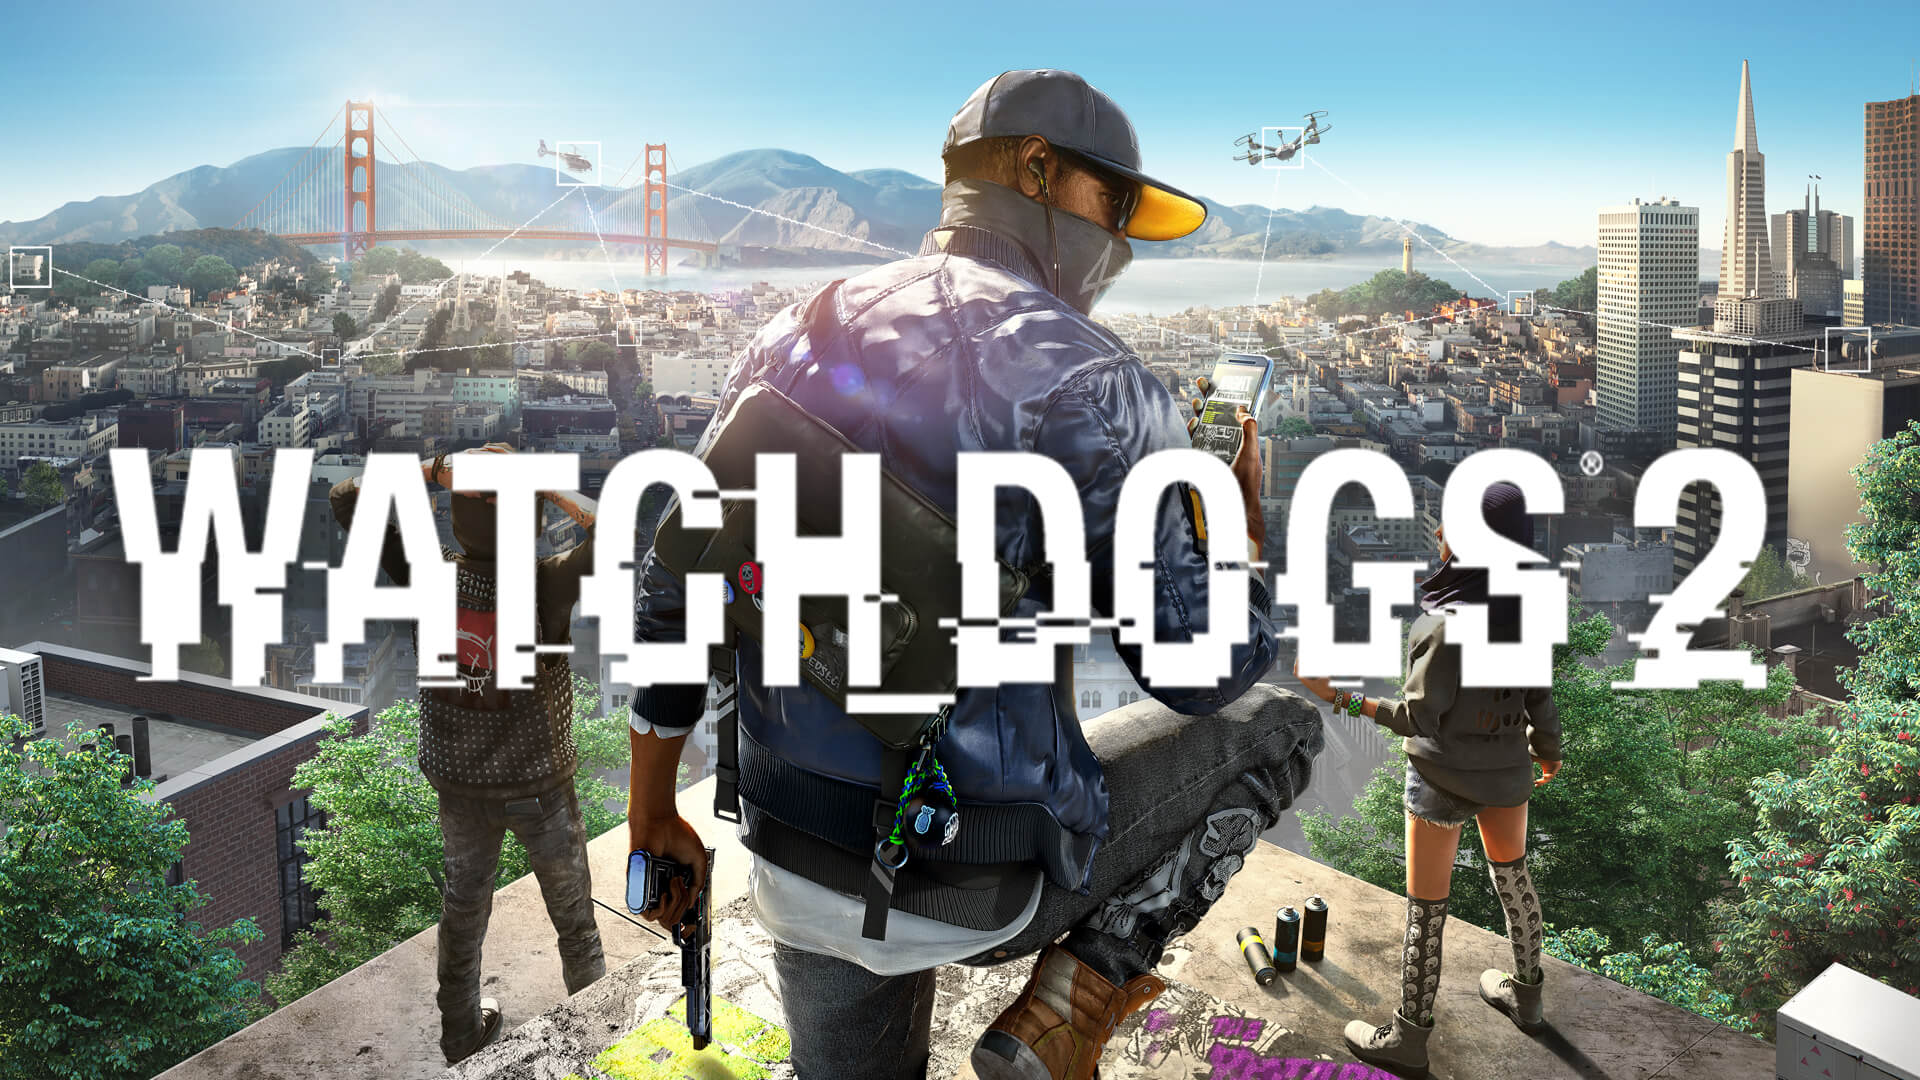 WATCH DOGS 2 / Online Uplay / Full Access / Warranty / Inactive / Gift